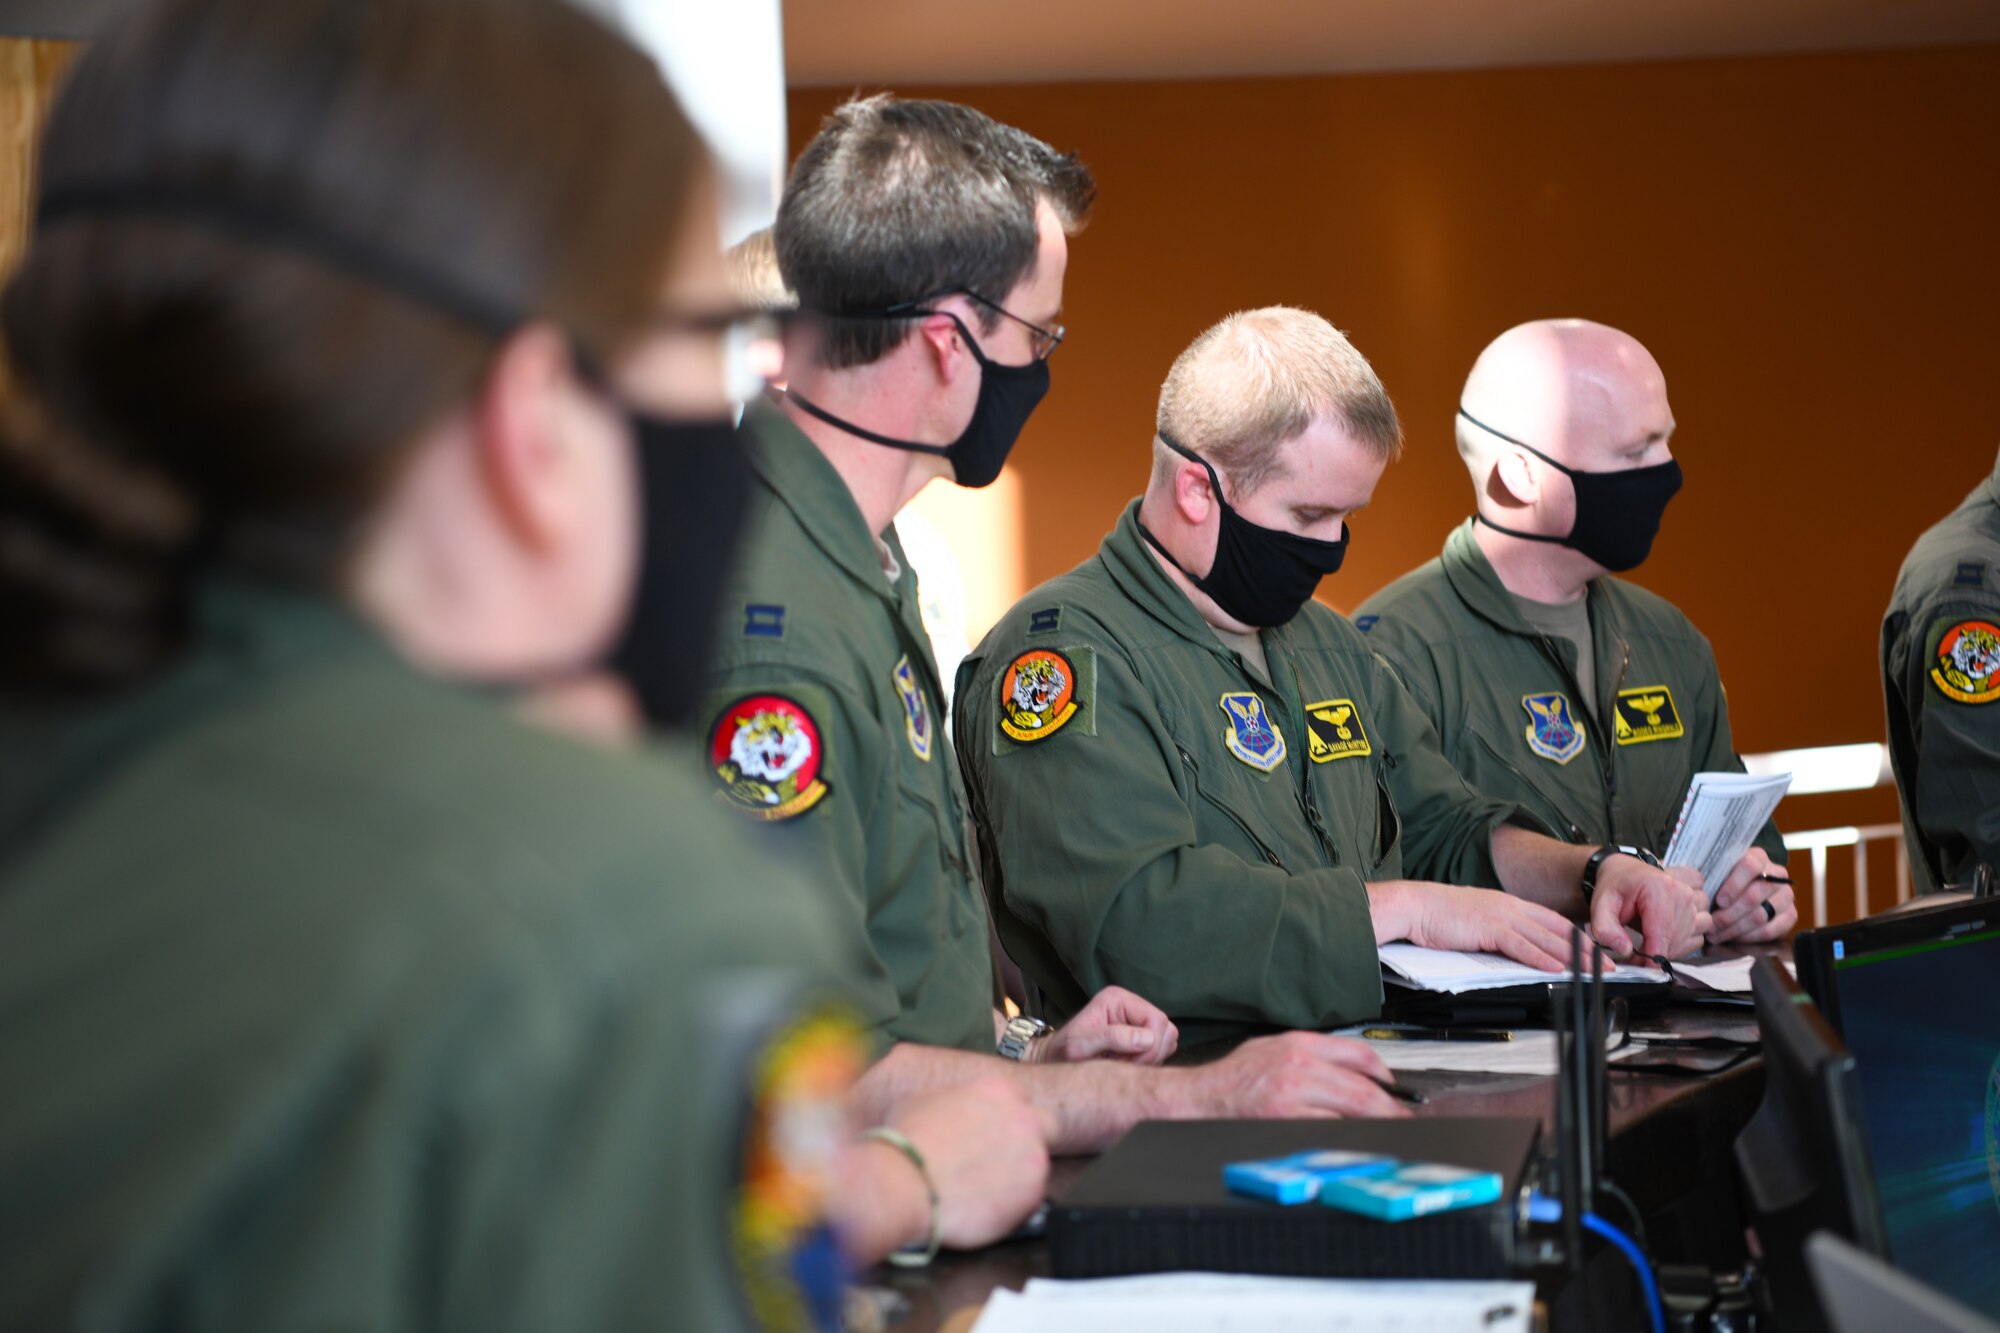 Aviators from the 37th Bomb Squadron receive a final mission briefing before launching B-1B Lancers from Ellsworth Air Force Base, S.D., April 28, 2020. The crew flew two B-1s from the continental United States and conducted operations over the South China Sea as part of a joint U.S. Indo-Pacific Command and U.S. Strategic Command Bomber Task Force mission. (U.S. Air Force photo by Senior Airman Nicolas Erwin)